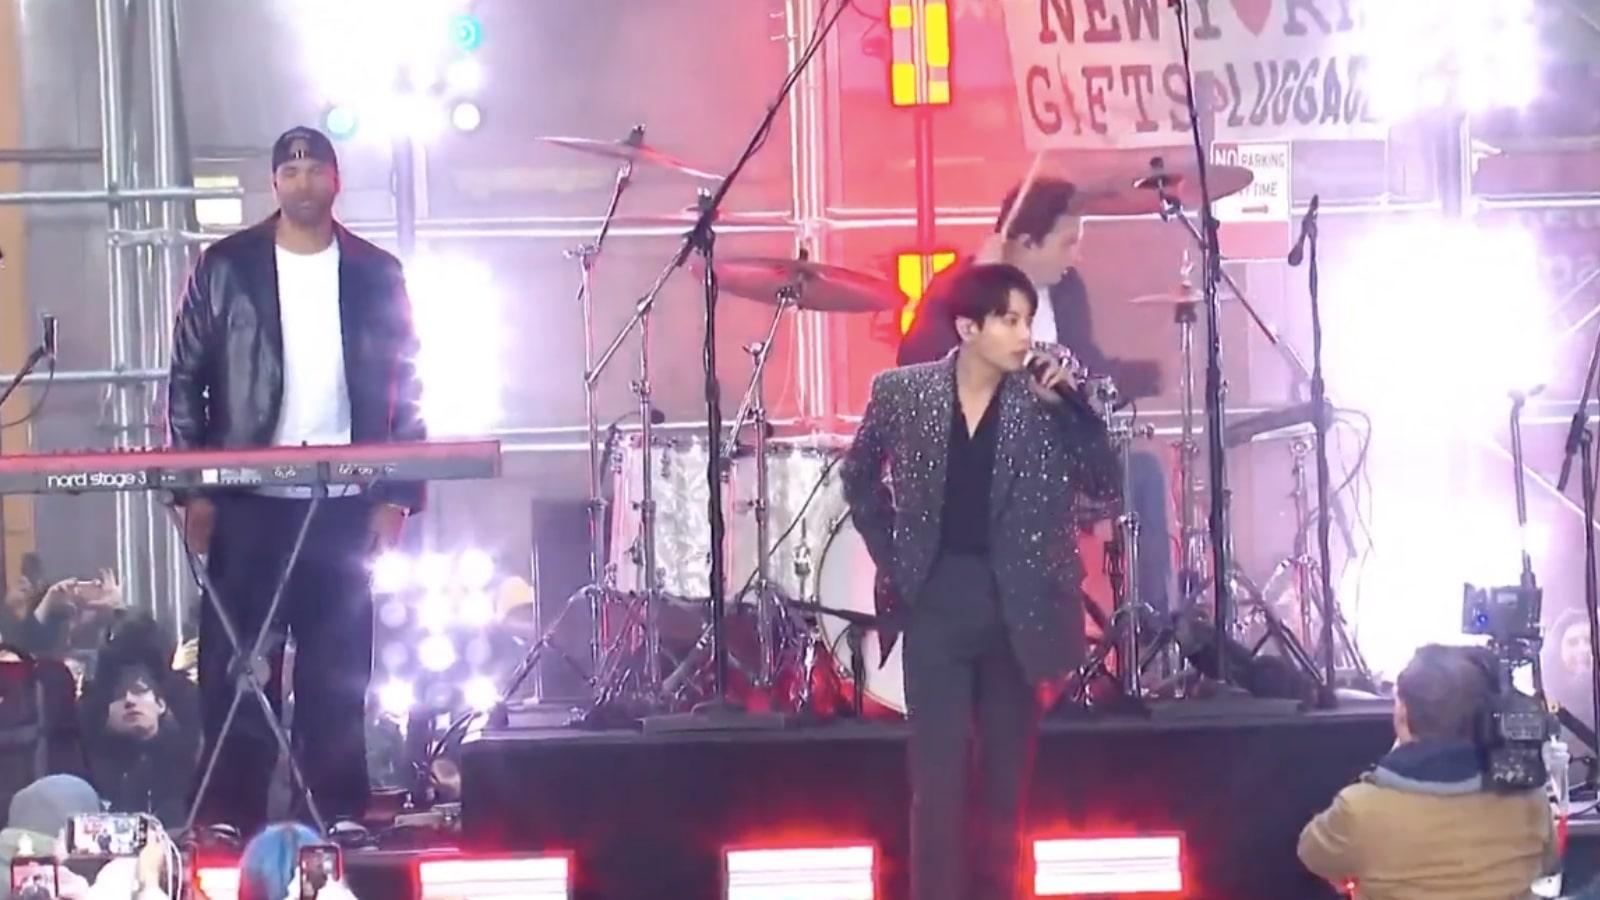 Jungkook in a sparkling jacket performs onstage during a concert.